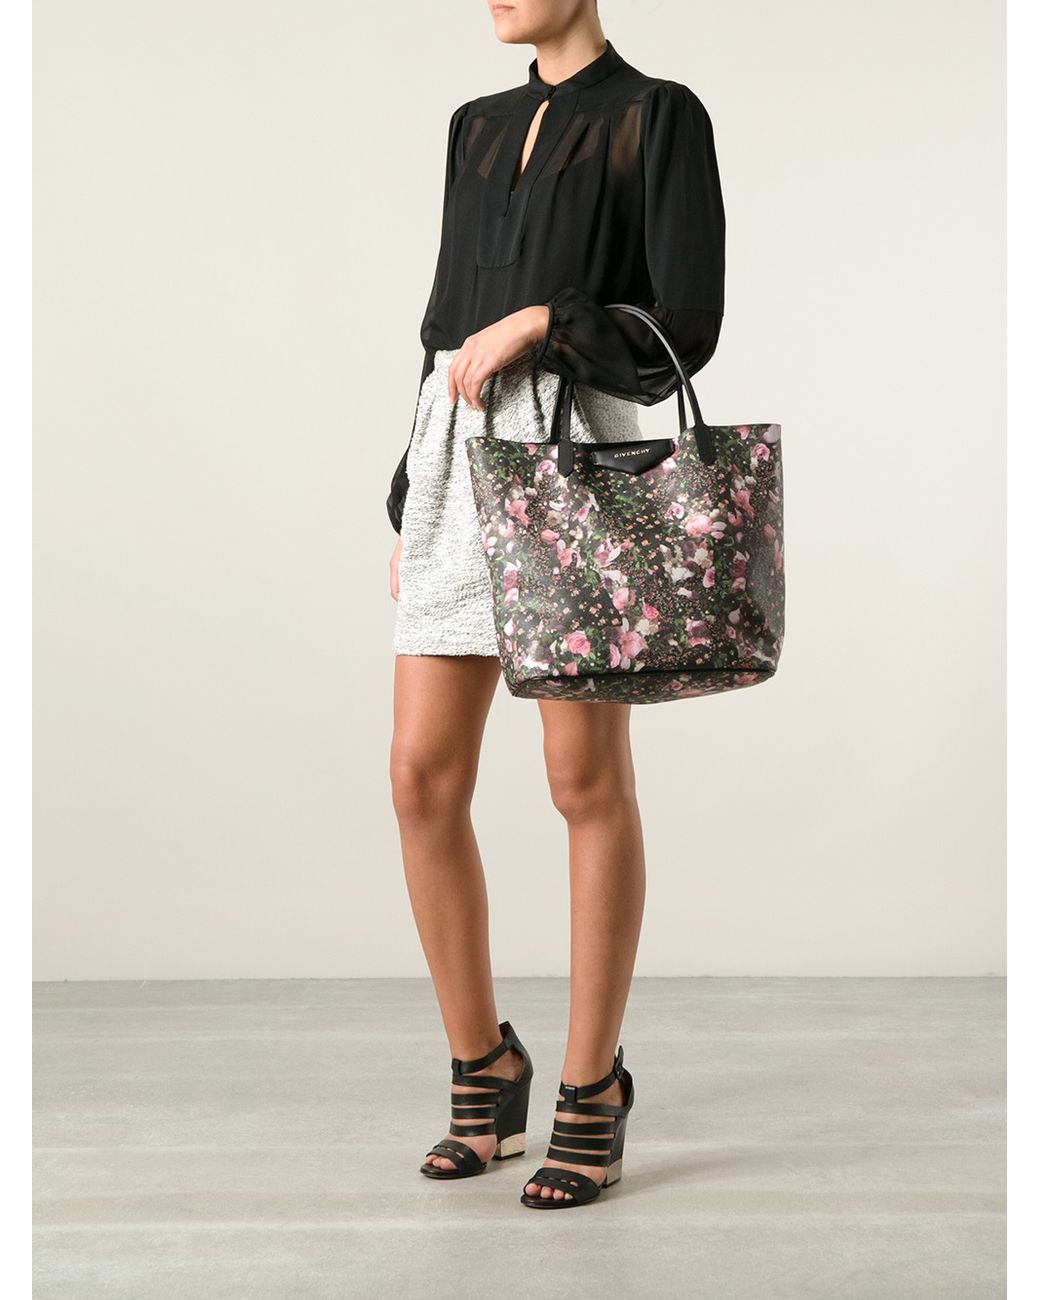 Total 51+ imagen givenchy floral tote